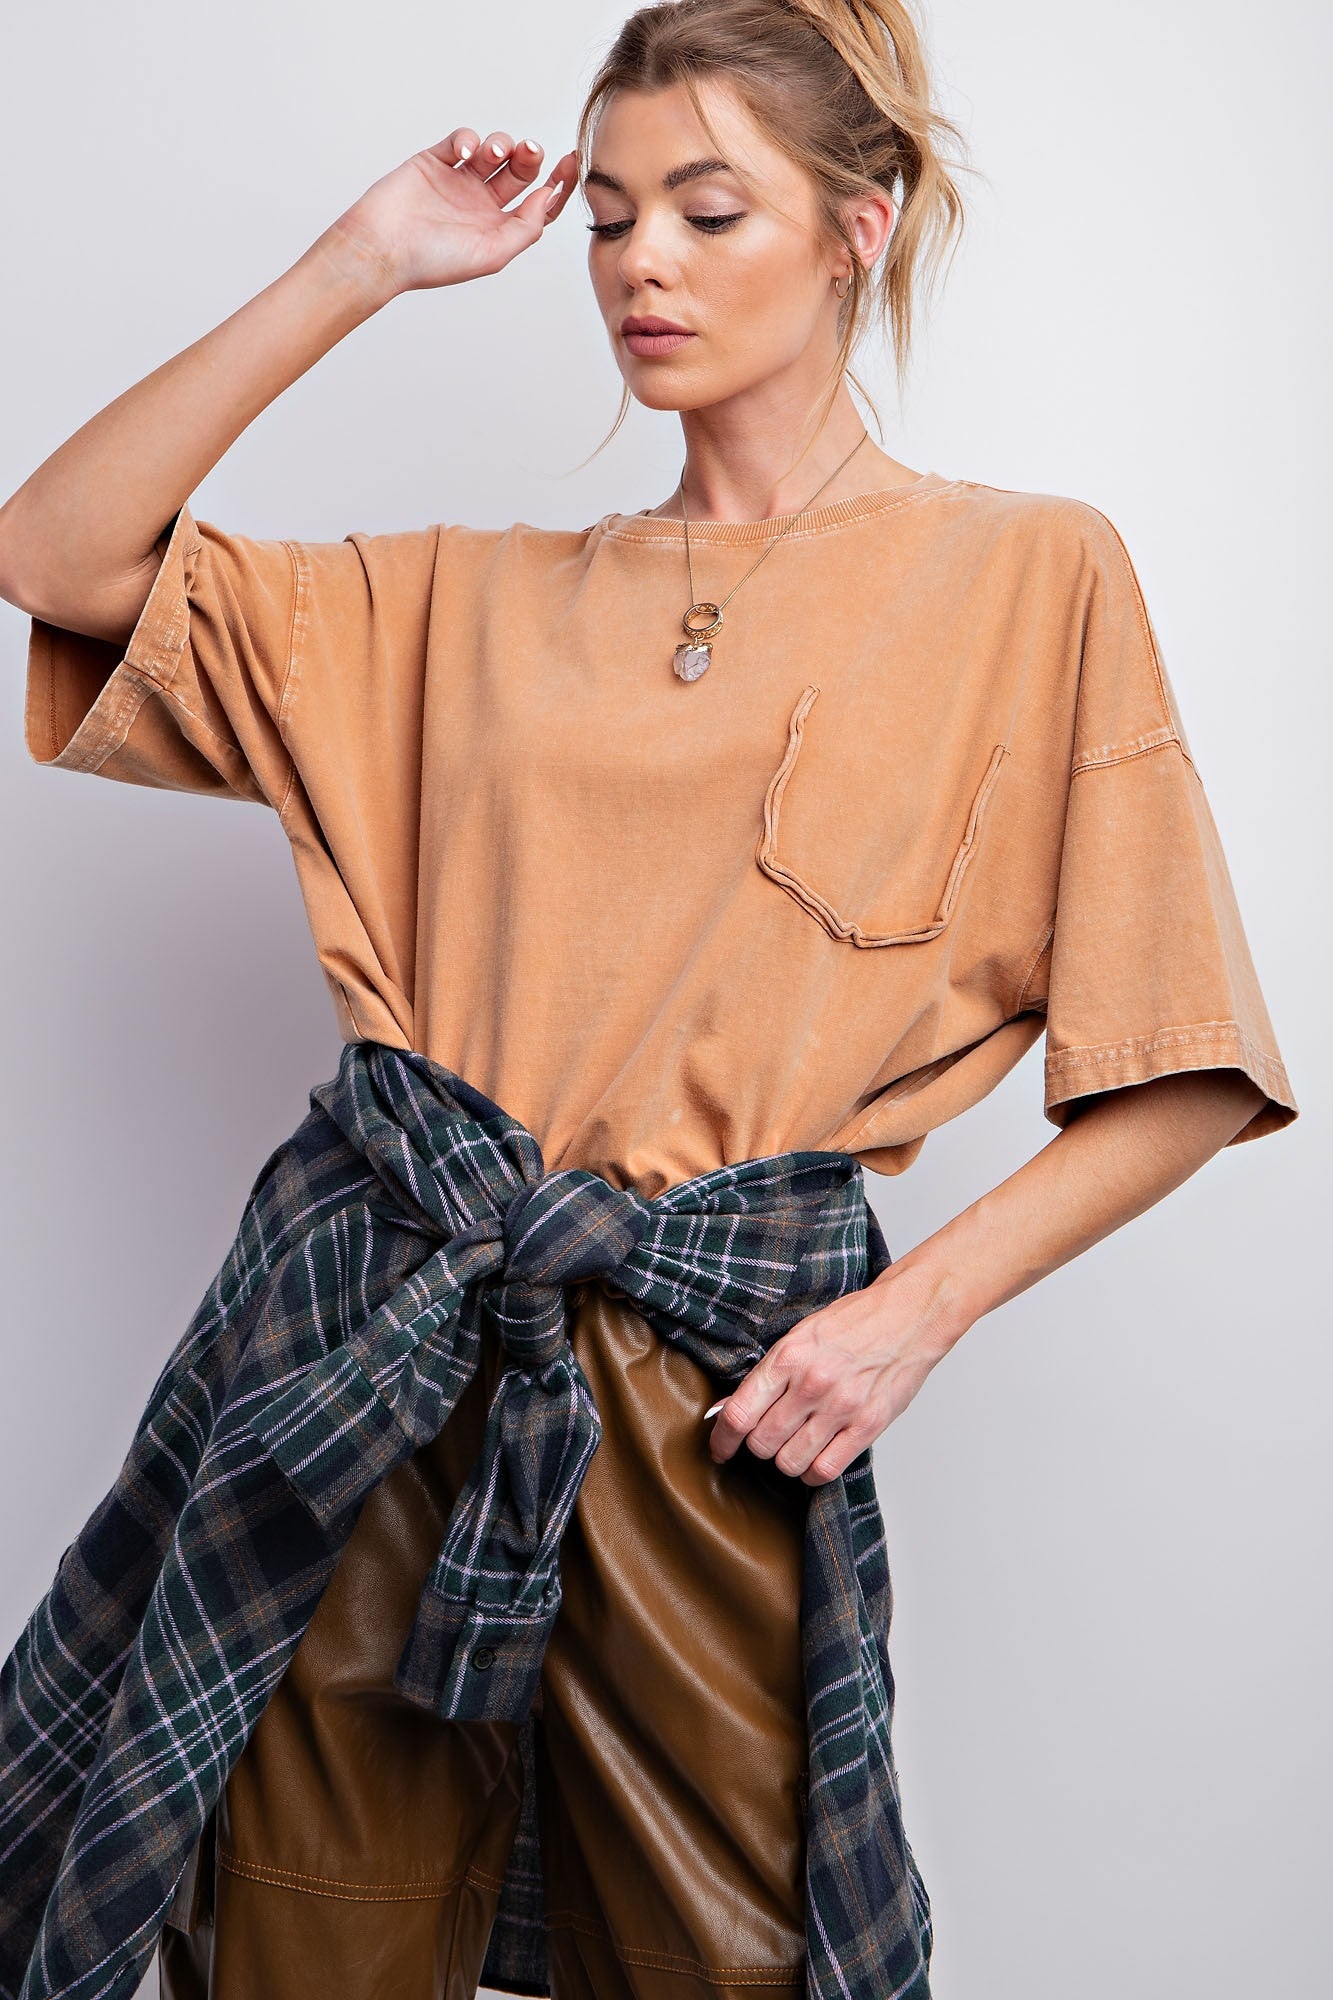 Easel Short Sleeve Mineral Wash Tunic Top in Toffee – June Adel